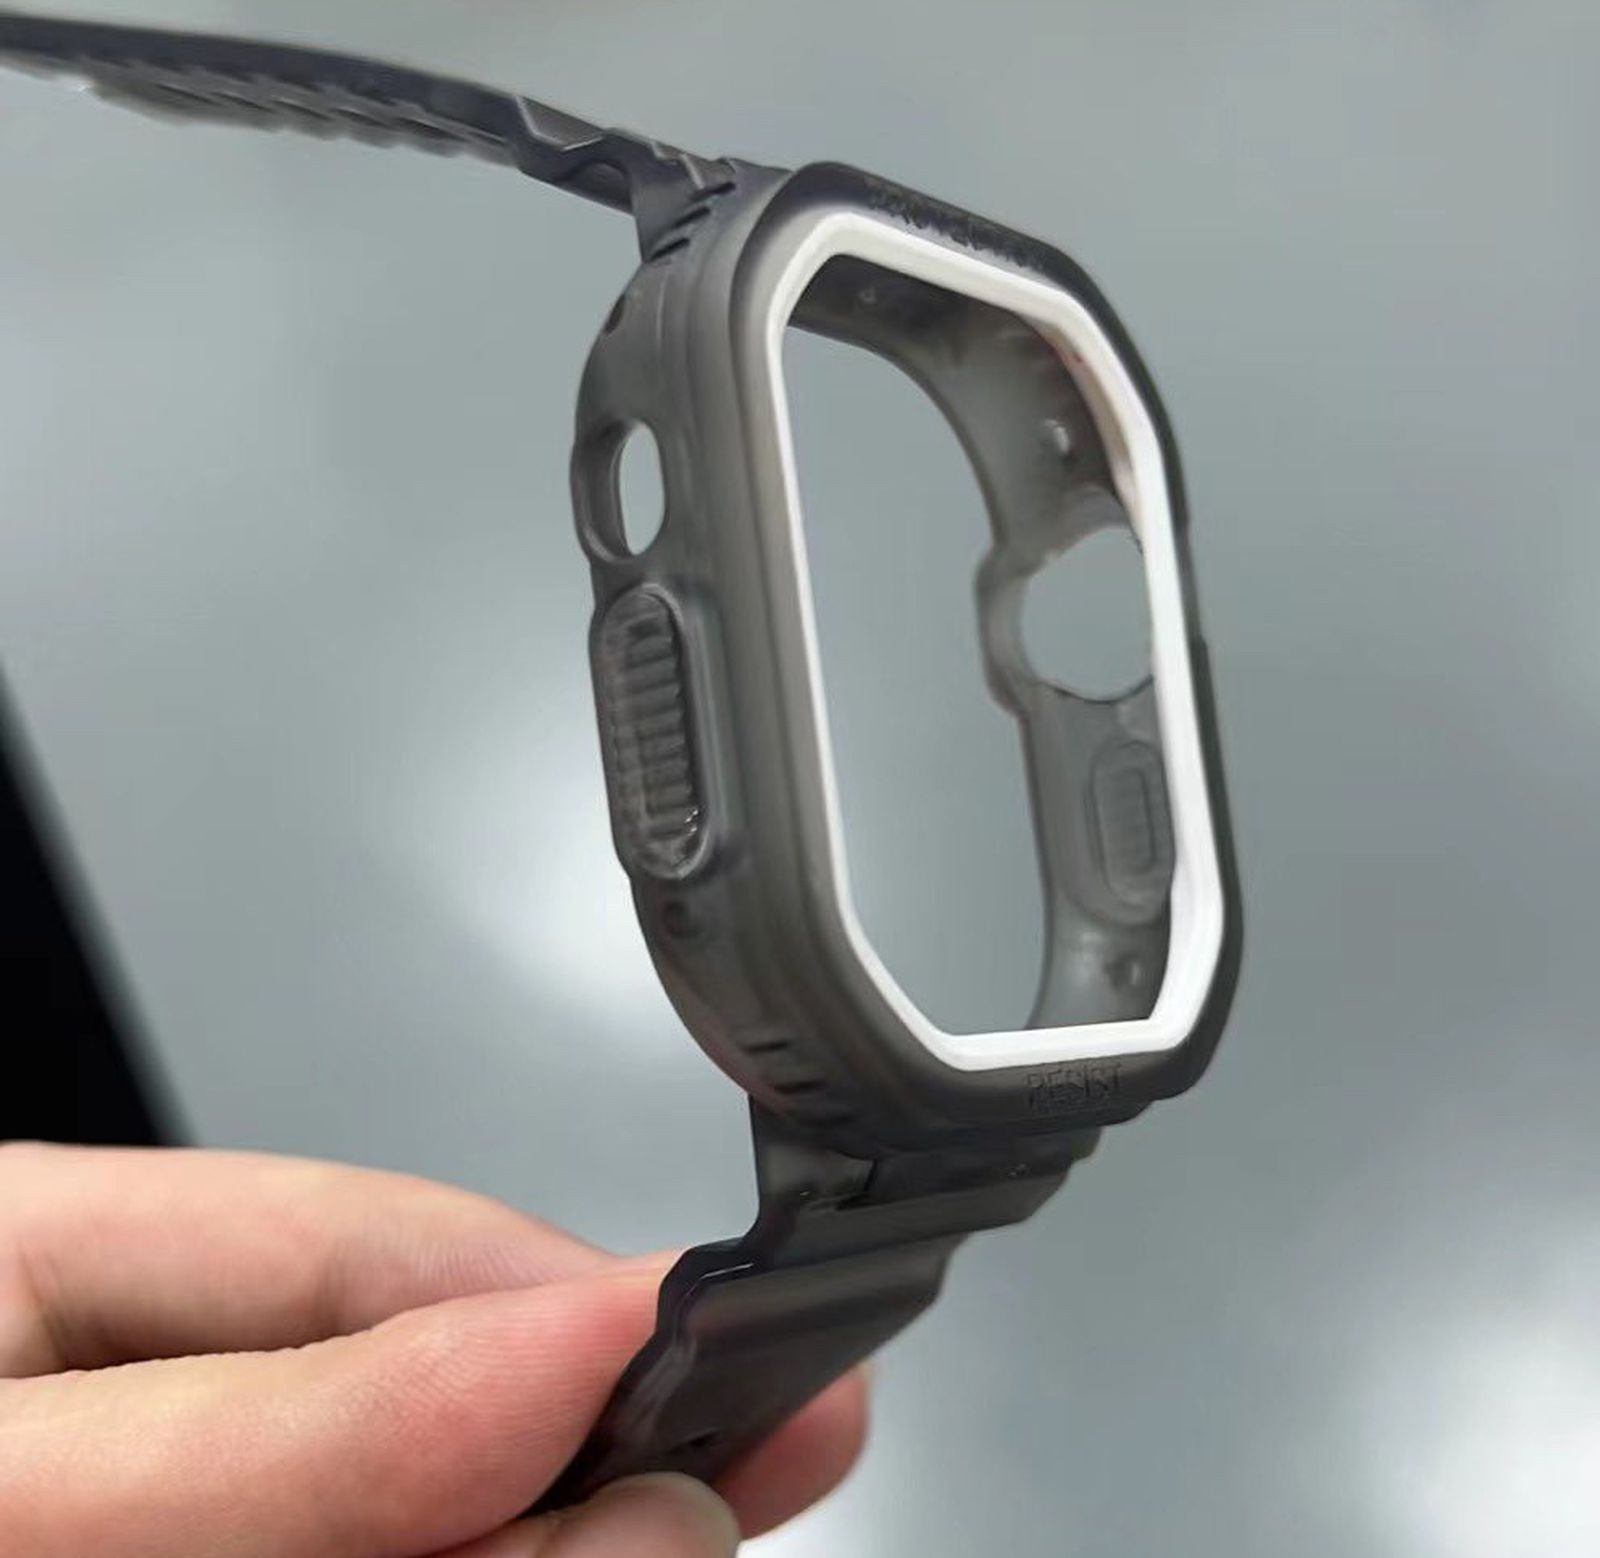 Apple Watch Pro May Feature Additional Physical Buttons for Workout-Related Func..